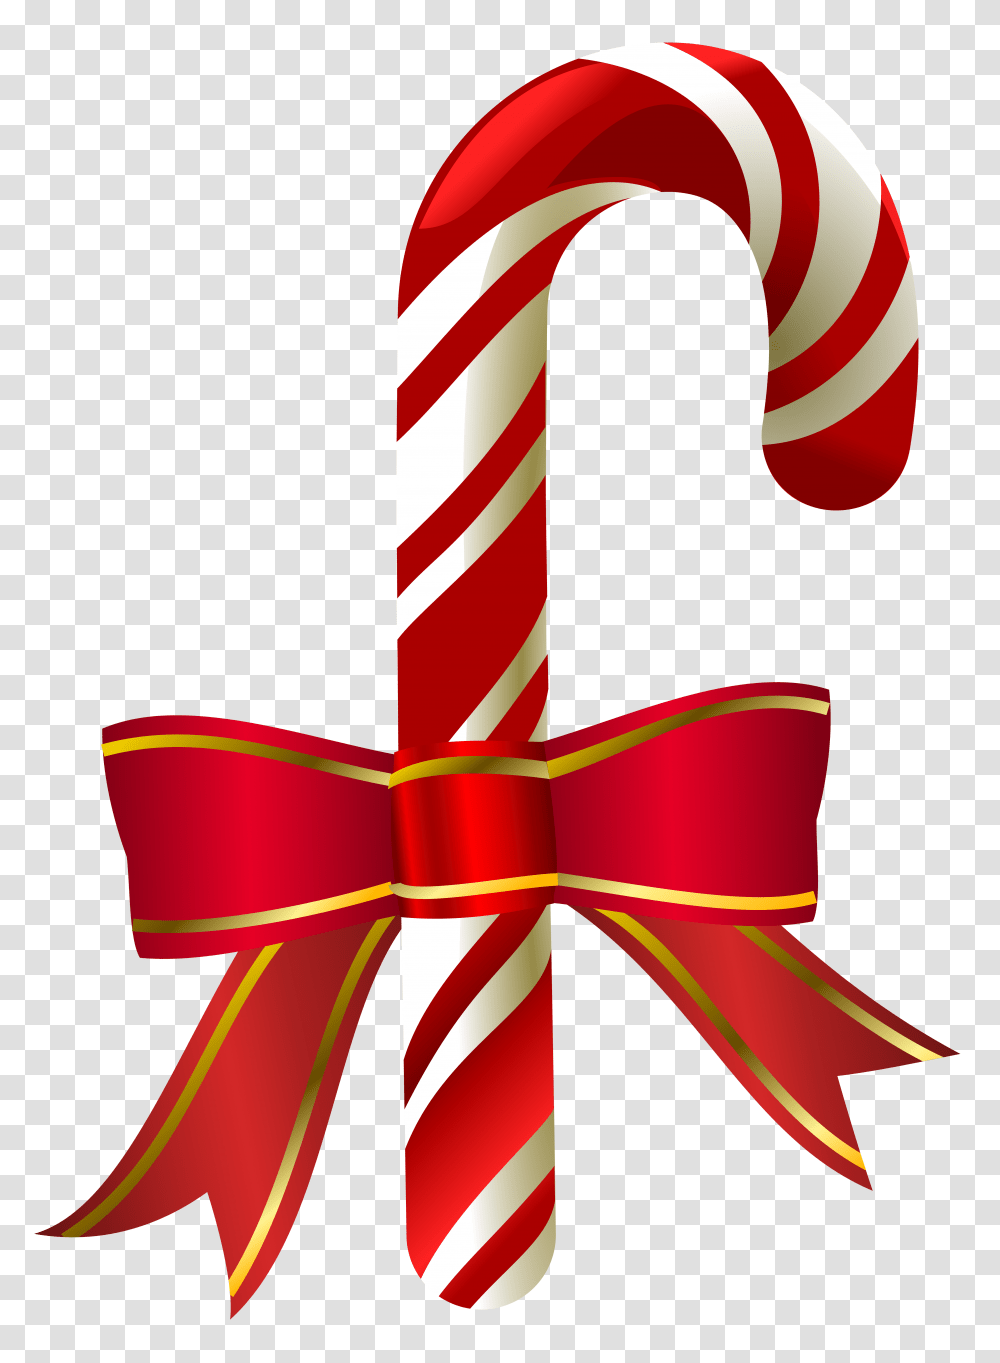 Christmas Candy Cane Clip Gallery, Dynamite, Bomb, Weapon, Weaponry Transparent Png